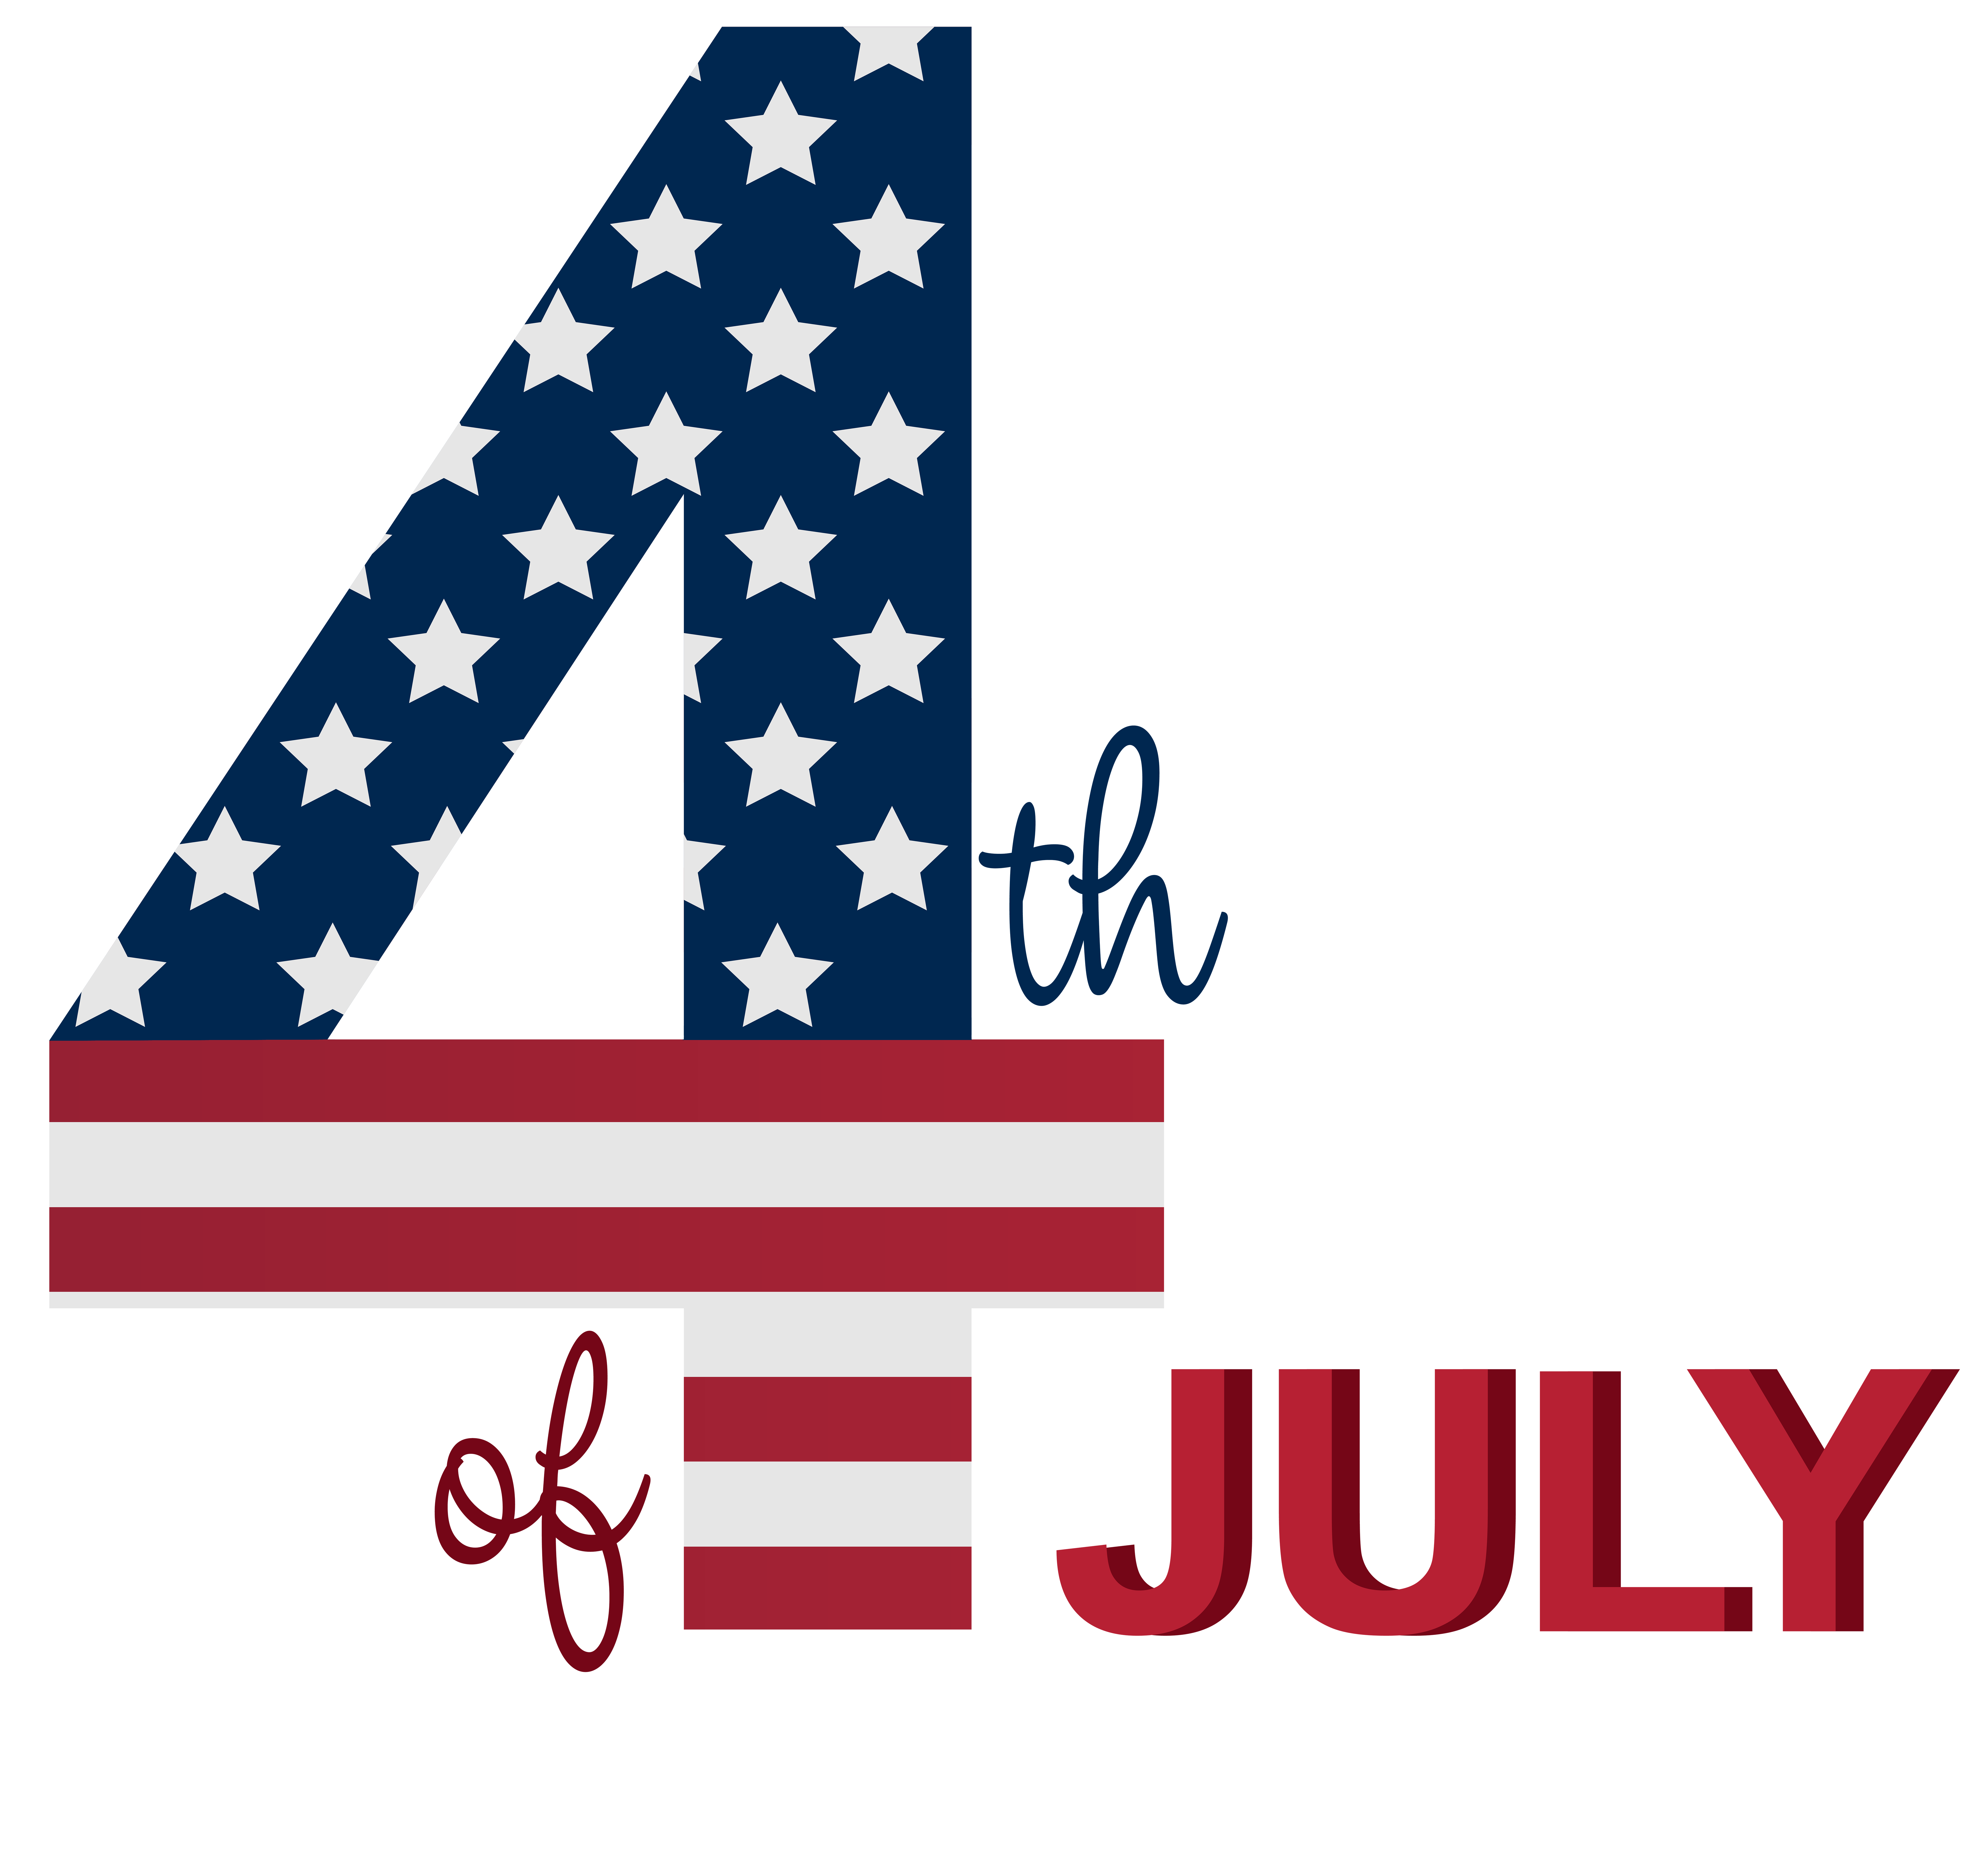 Ice clipart 4th july. Independence day clip art